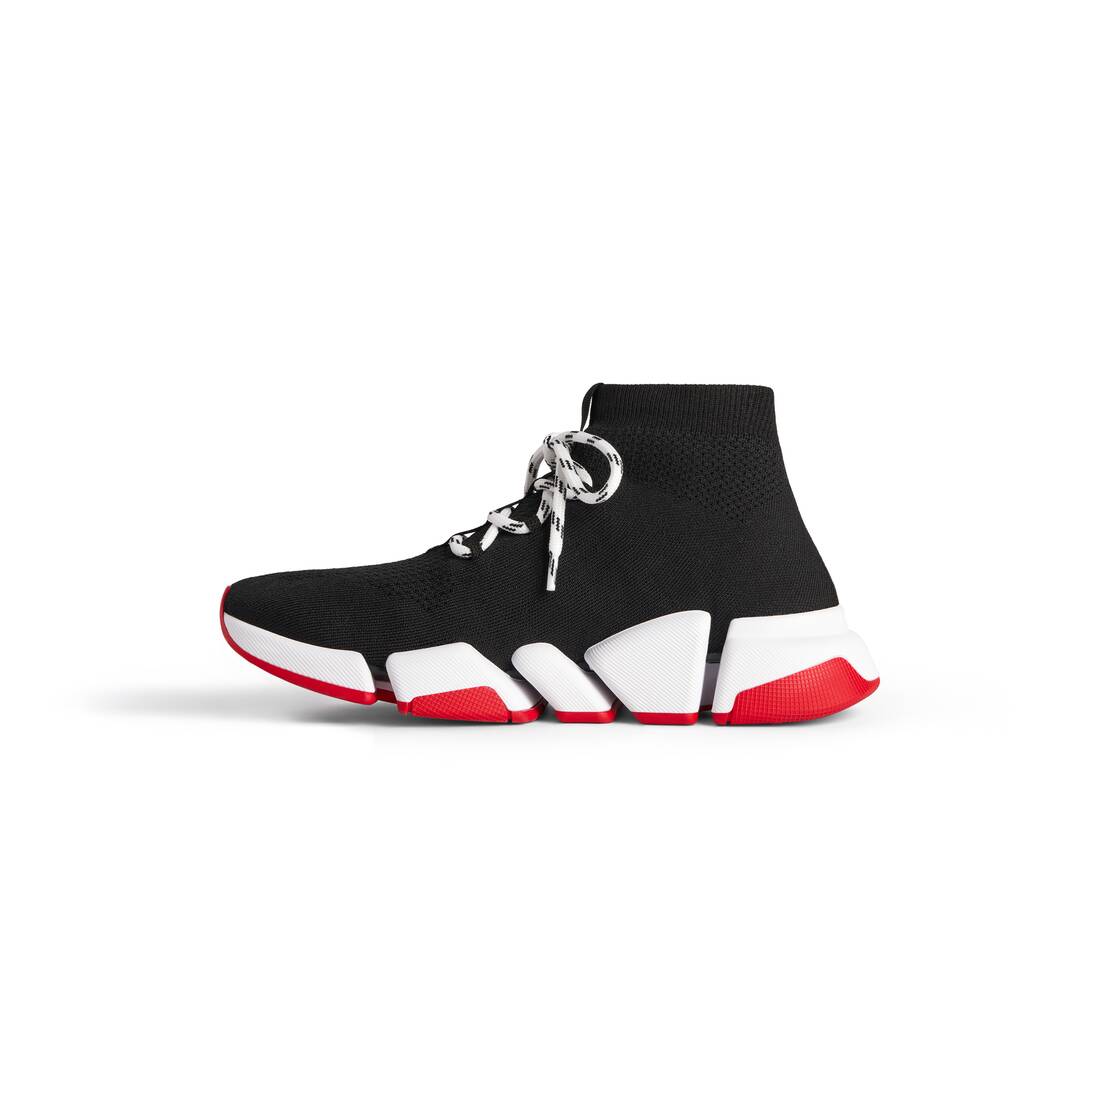 Balenciaga Recycled Speed Trainer Sneaker 'Red Black' Sz 40 / 7